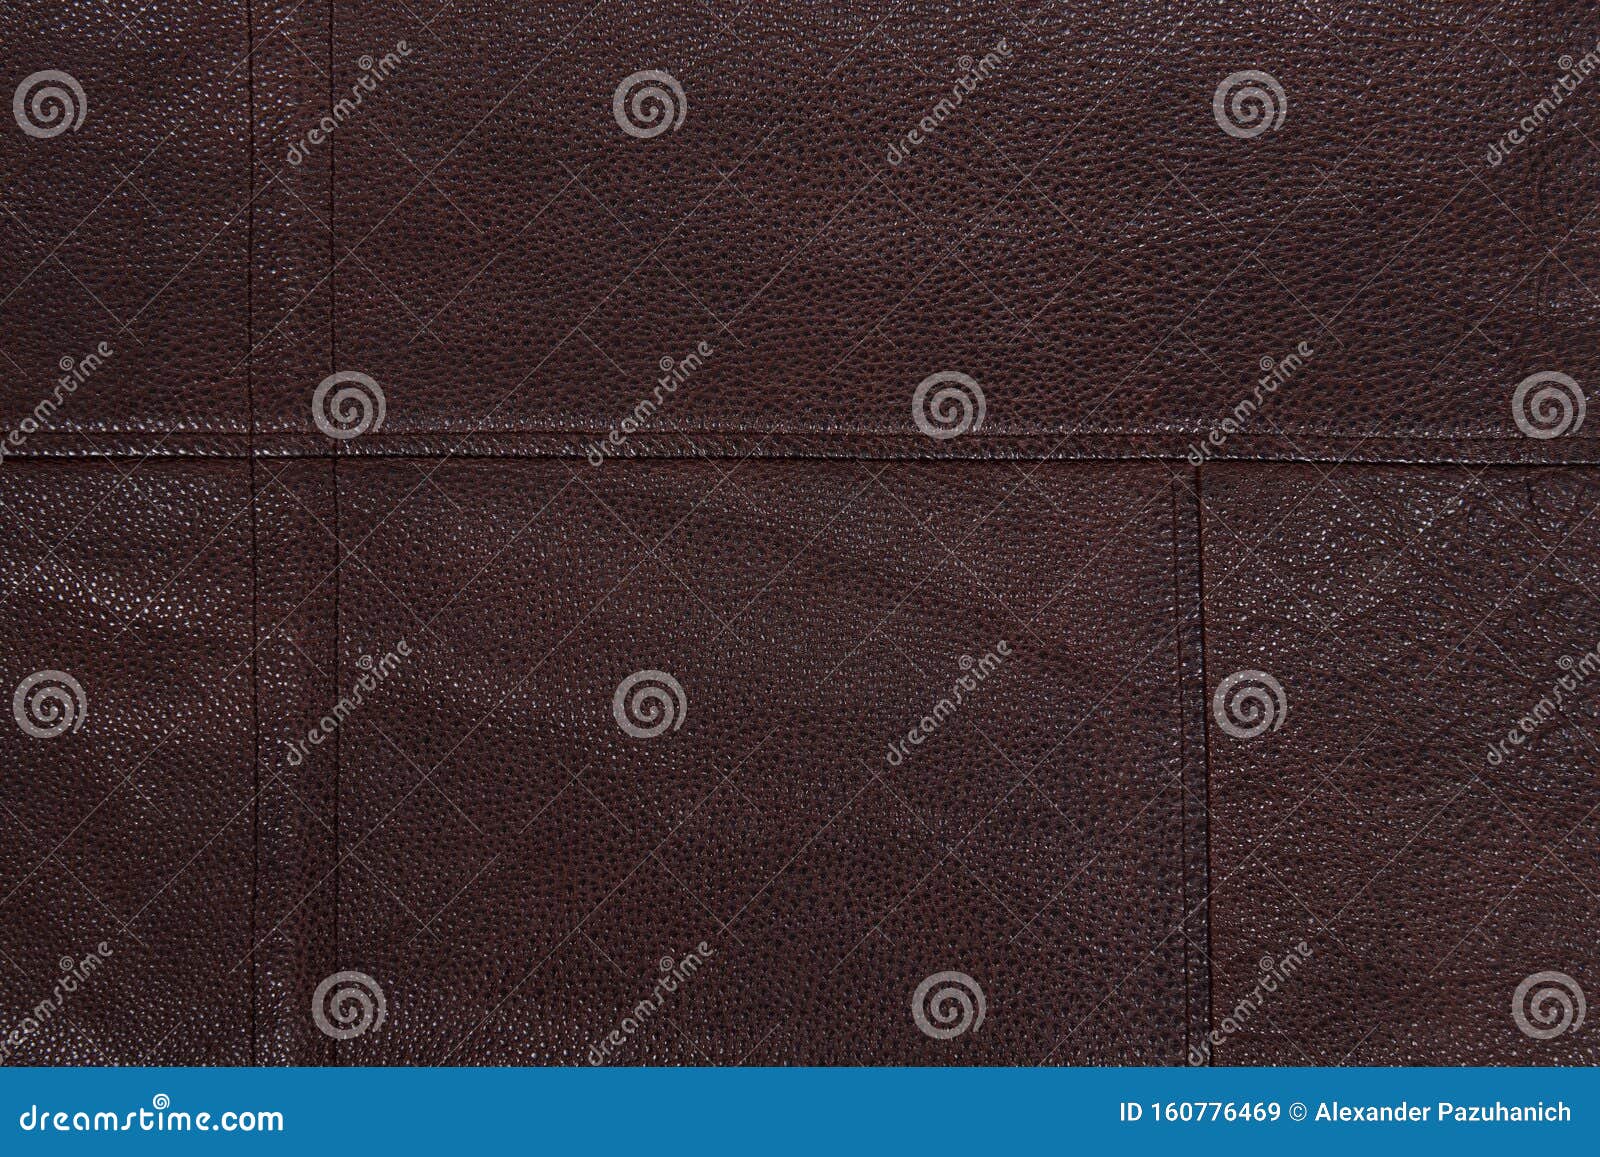 Dark Brown Stitched Leather Background. Stock Image - Image of garment ...